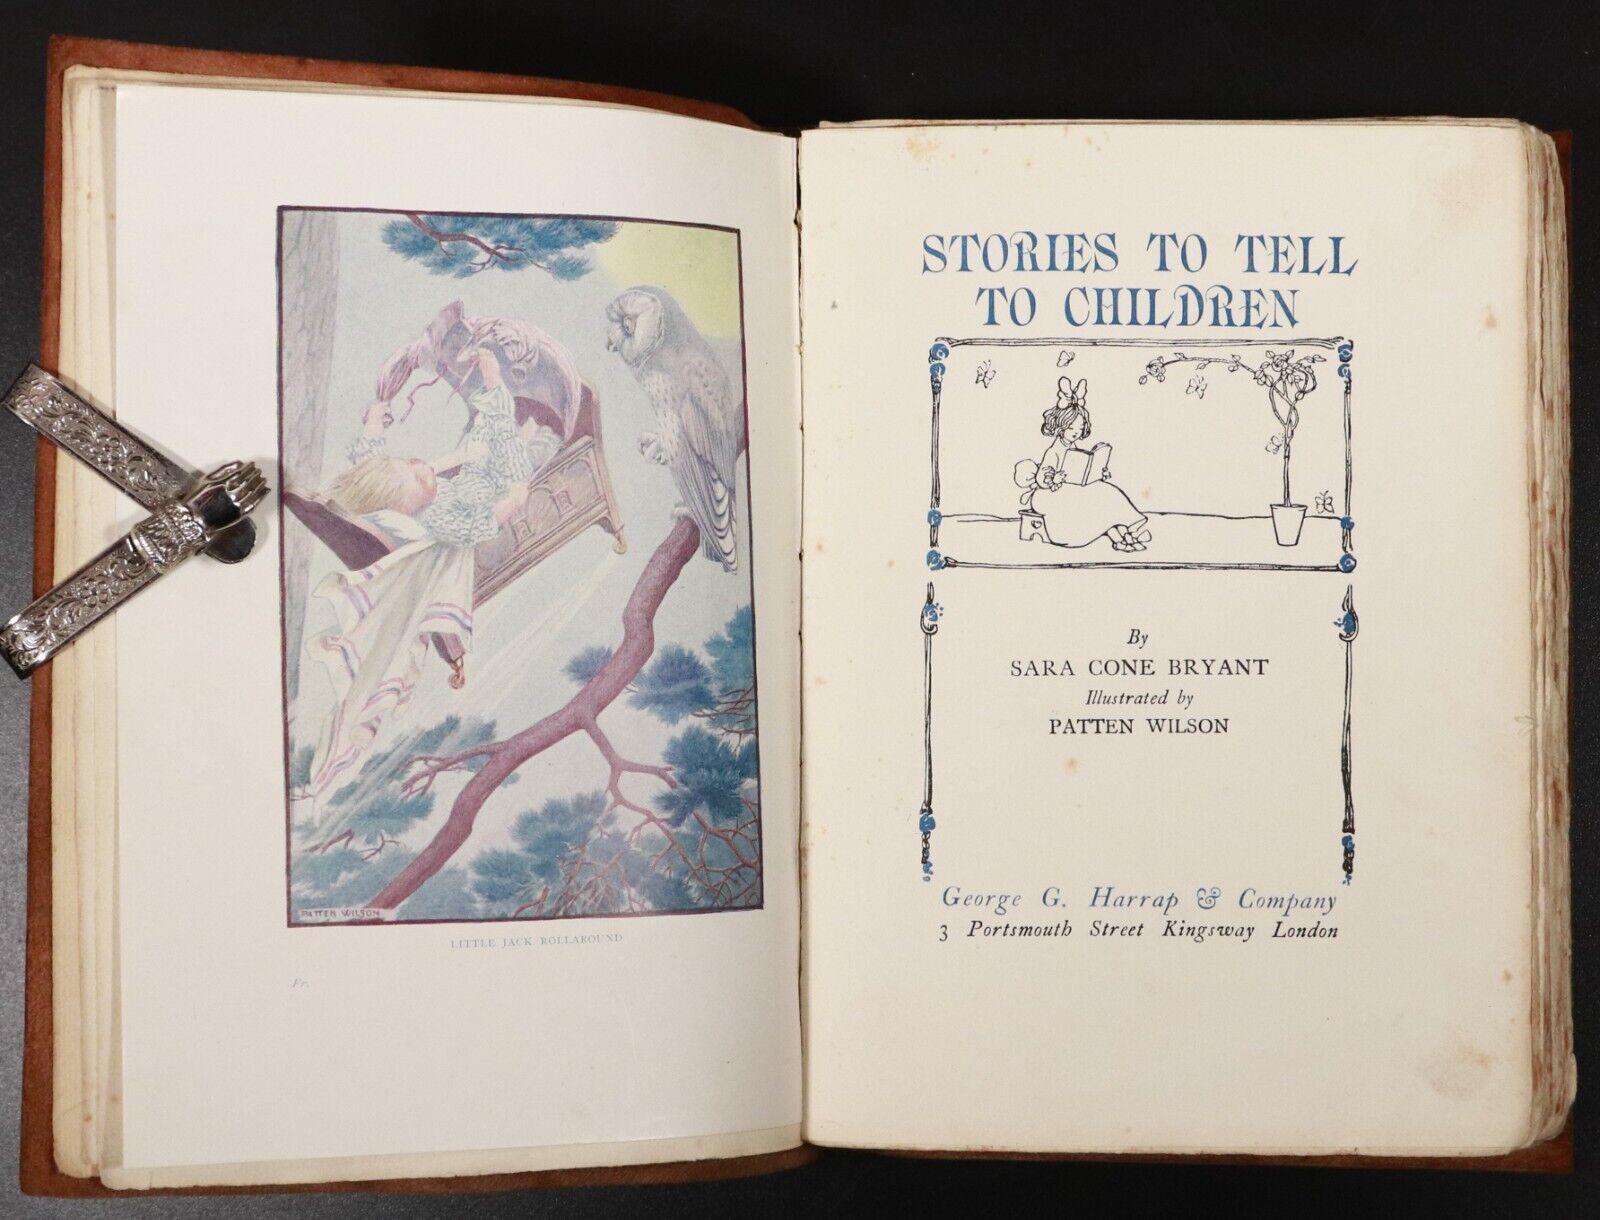 c1925 Stories To Tell Children by Sarah Cone Bryant Antique Childrens Book